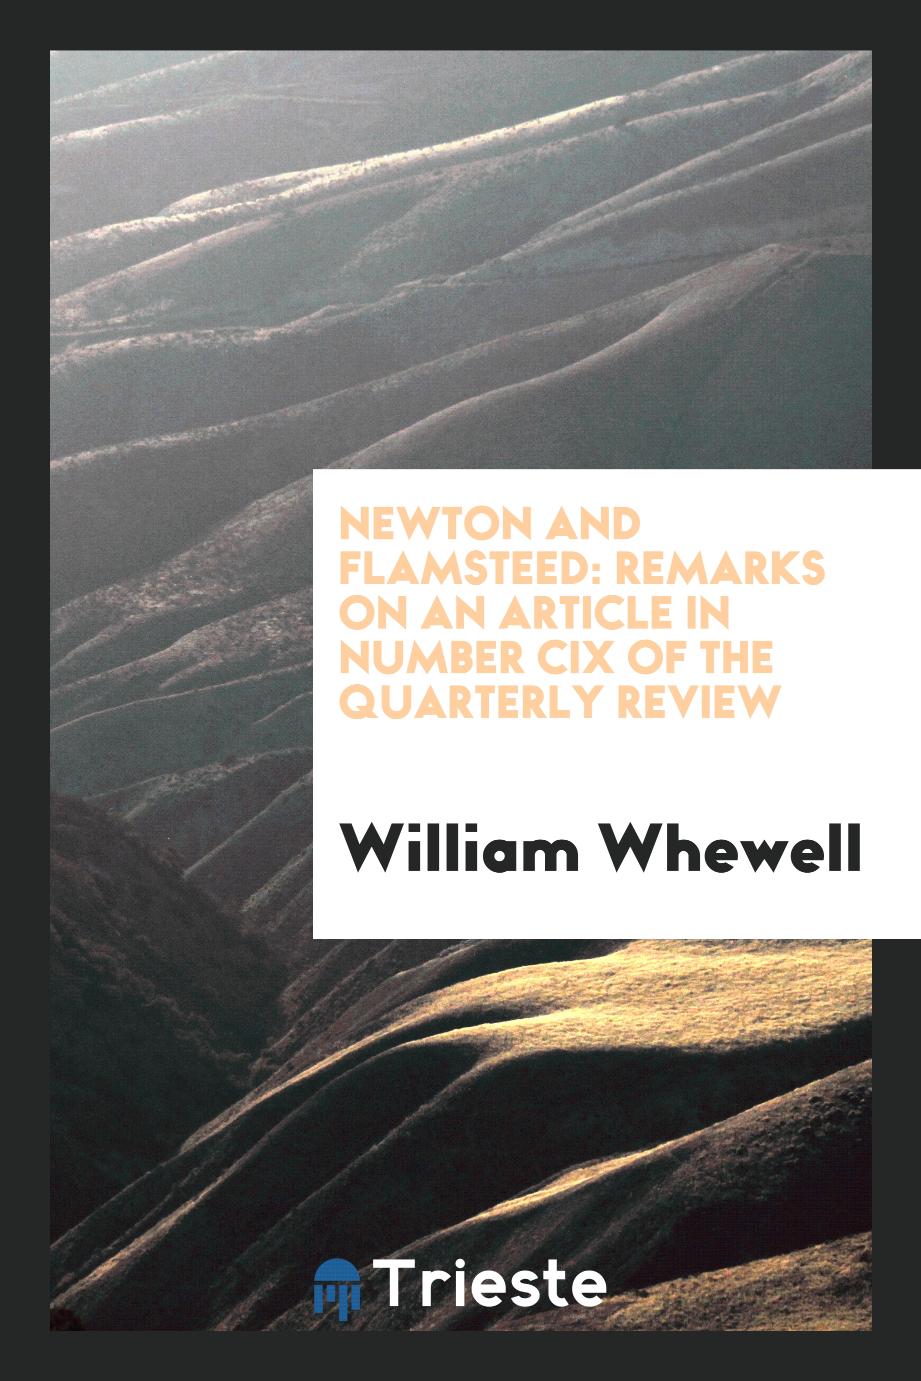 Newton and Flamsteed: Remarks on an article in number CIX of the Quarterly review